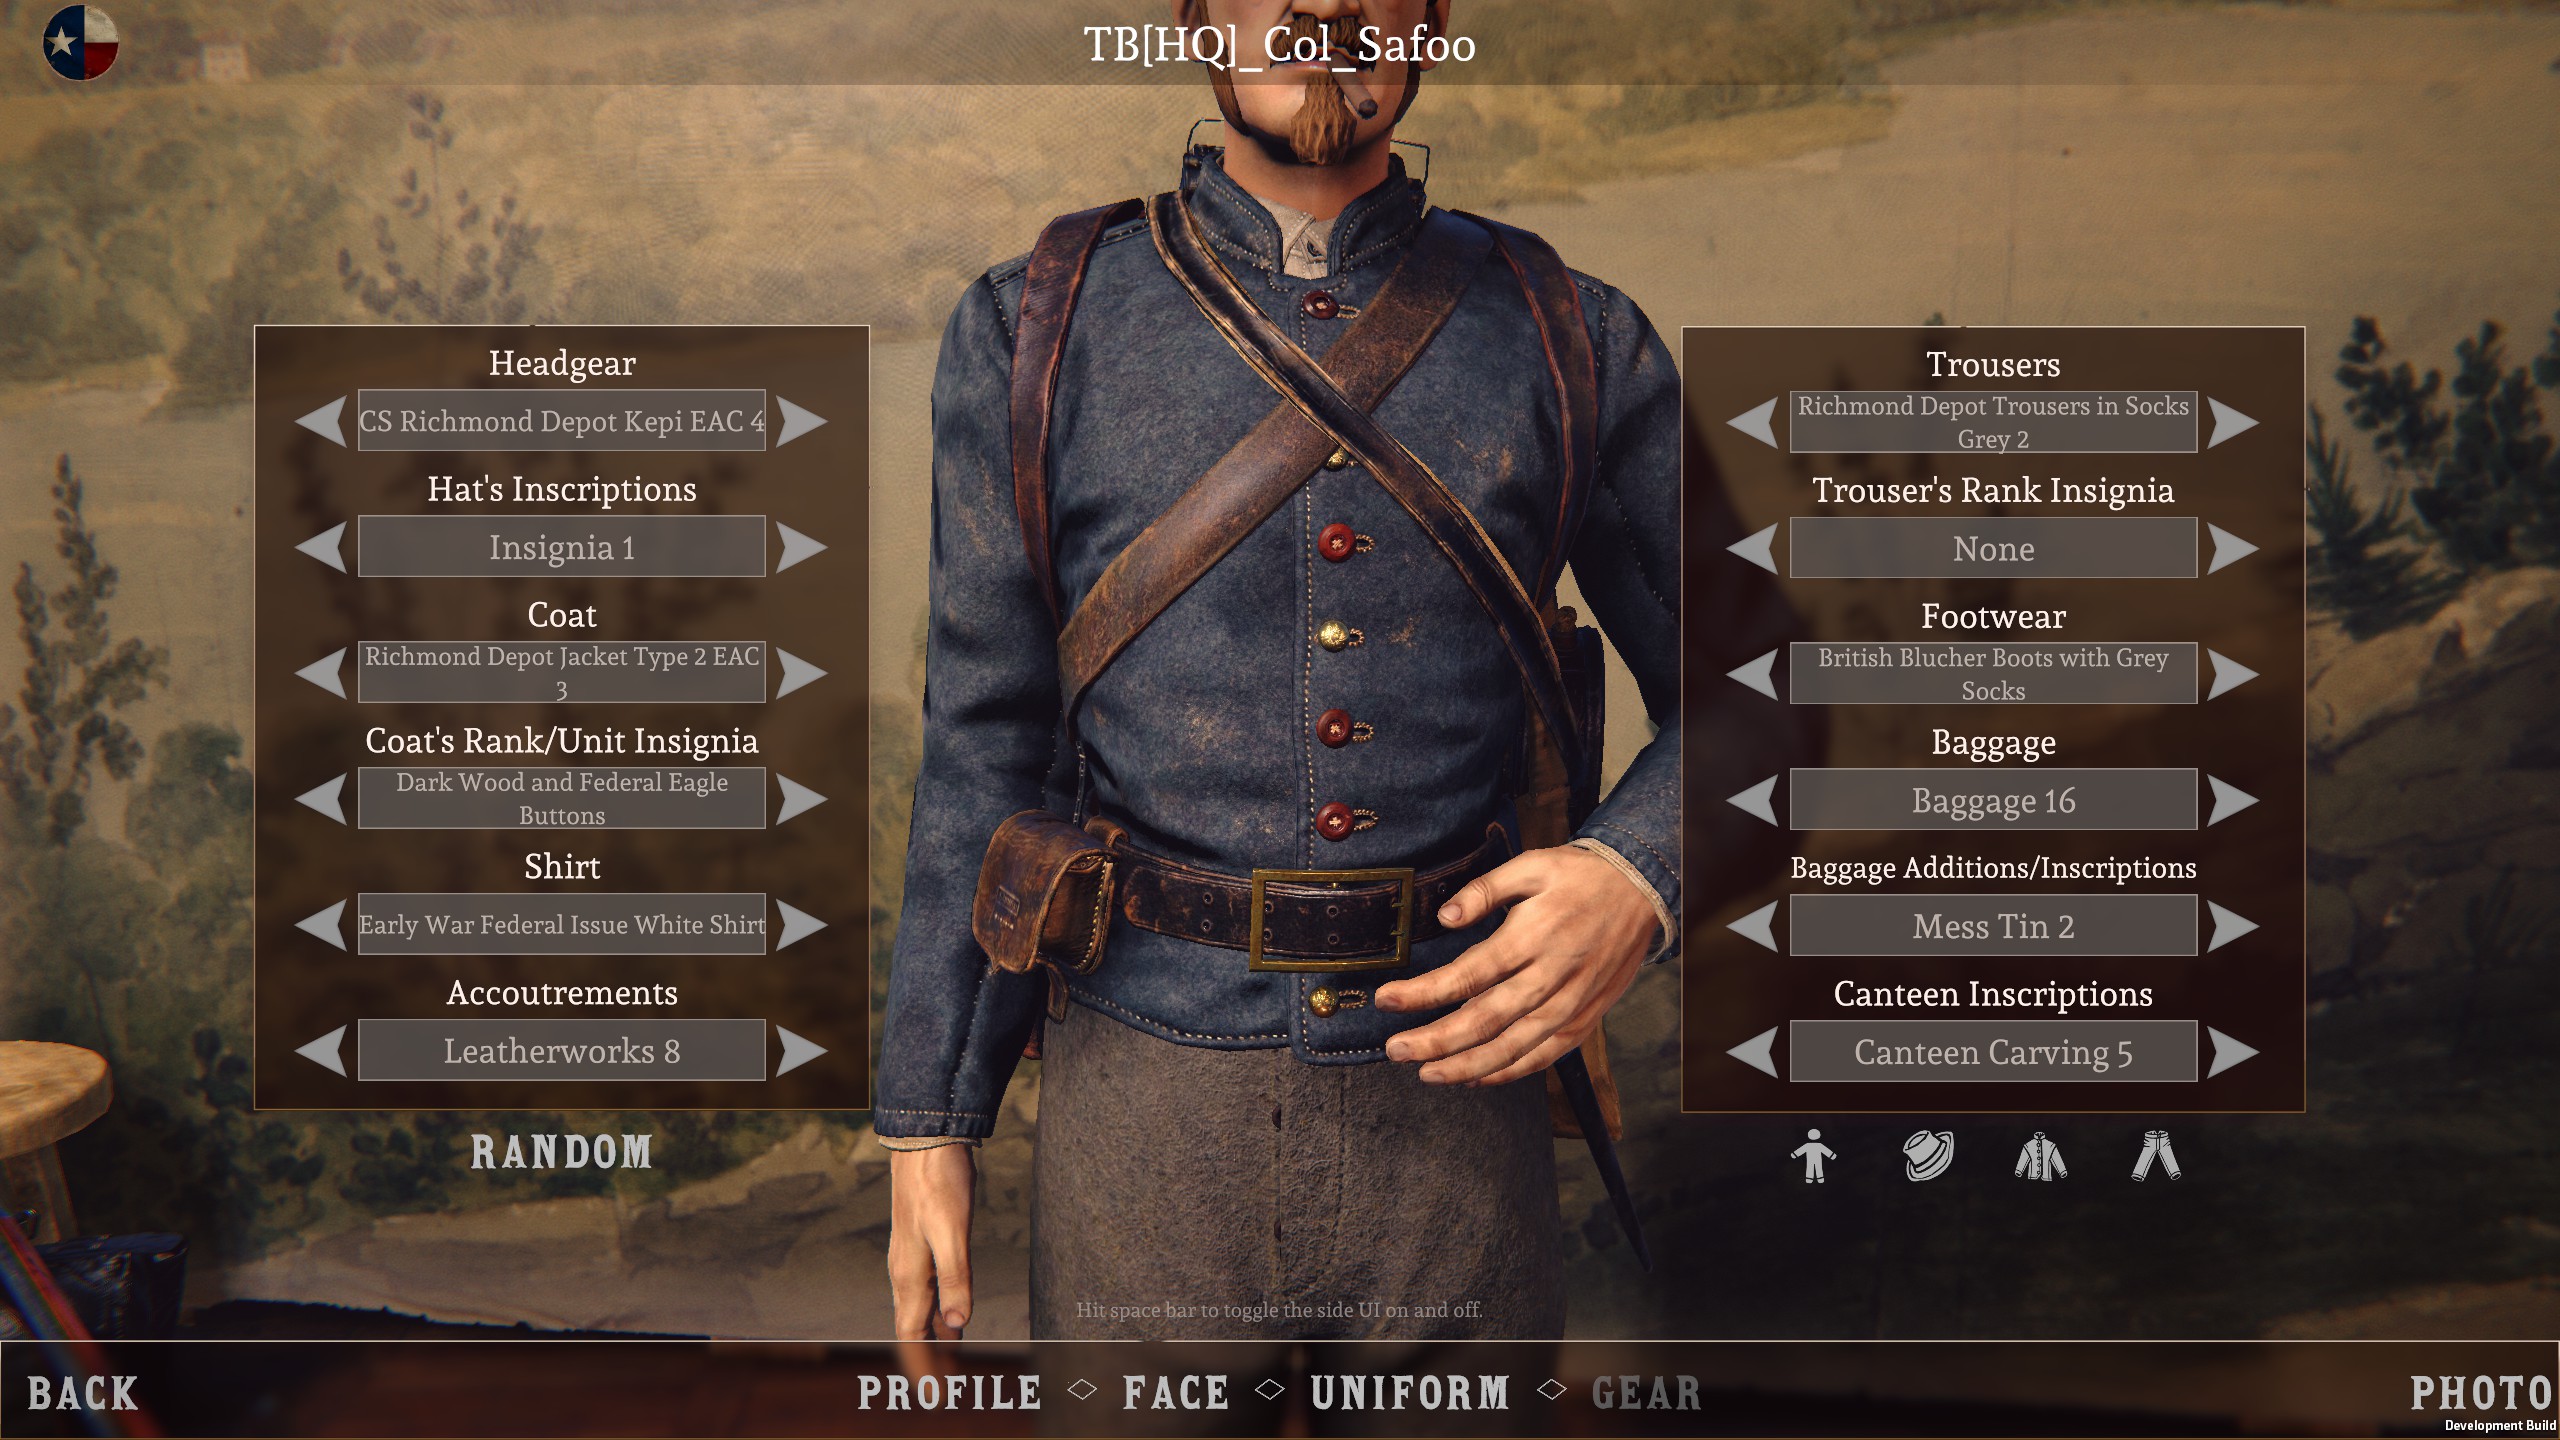 Battle Cry of Freedom - How to Customize Character & Uniform Guide - Uniform Customization - 52485DF